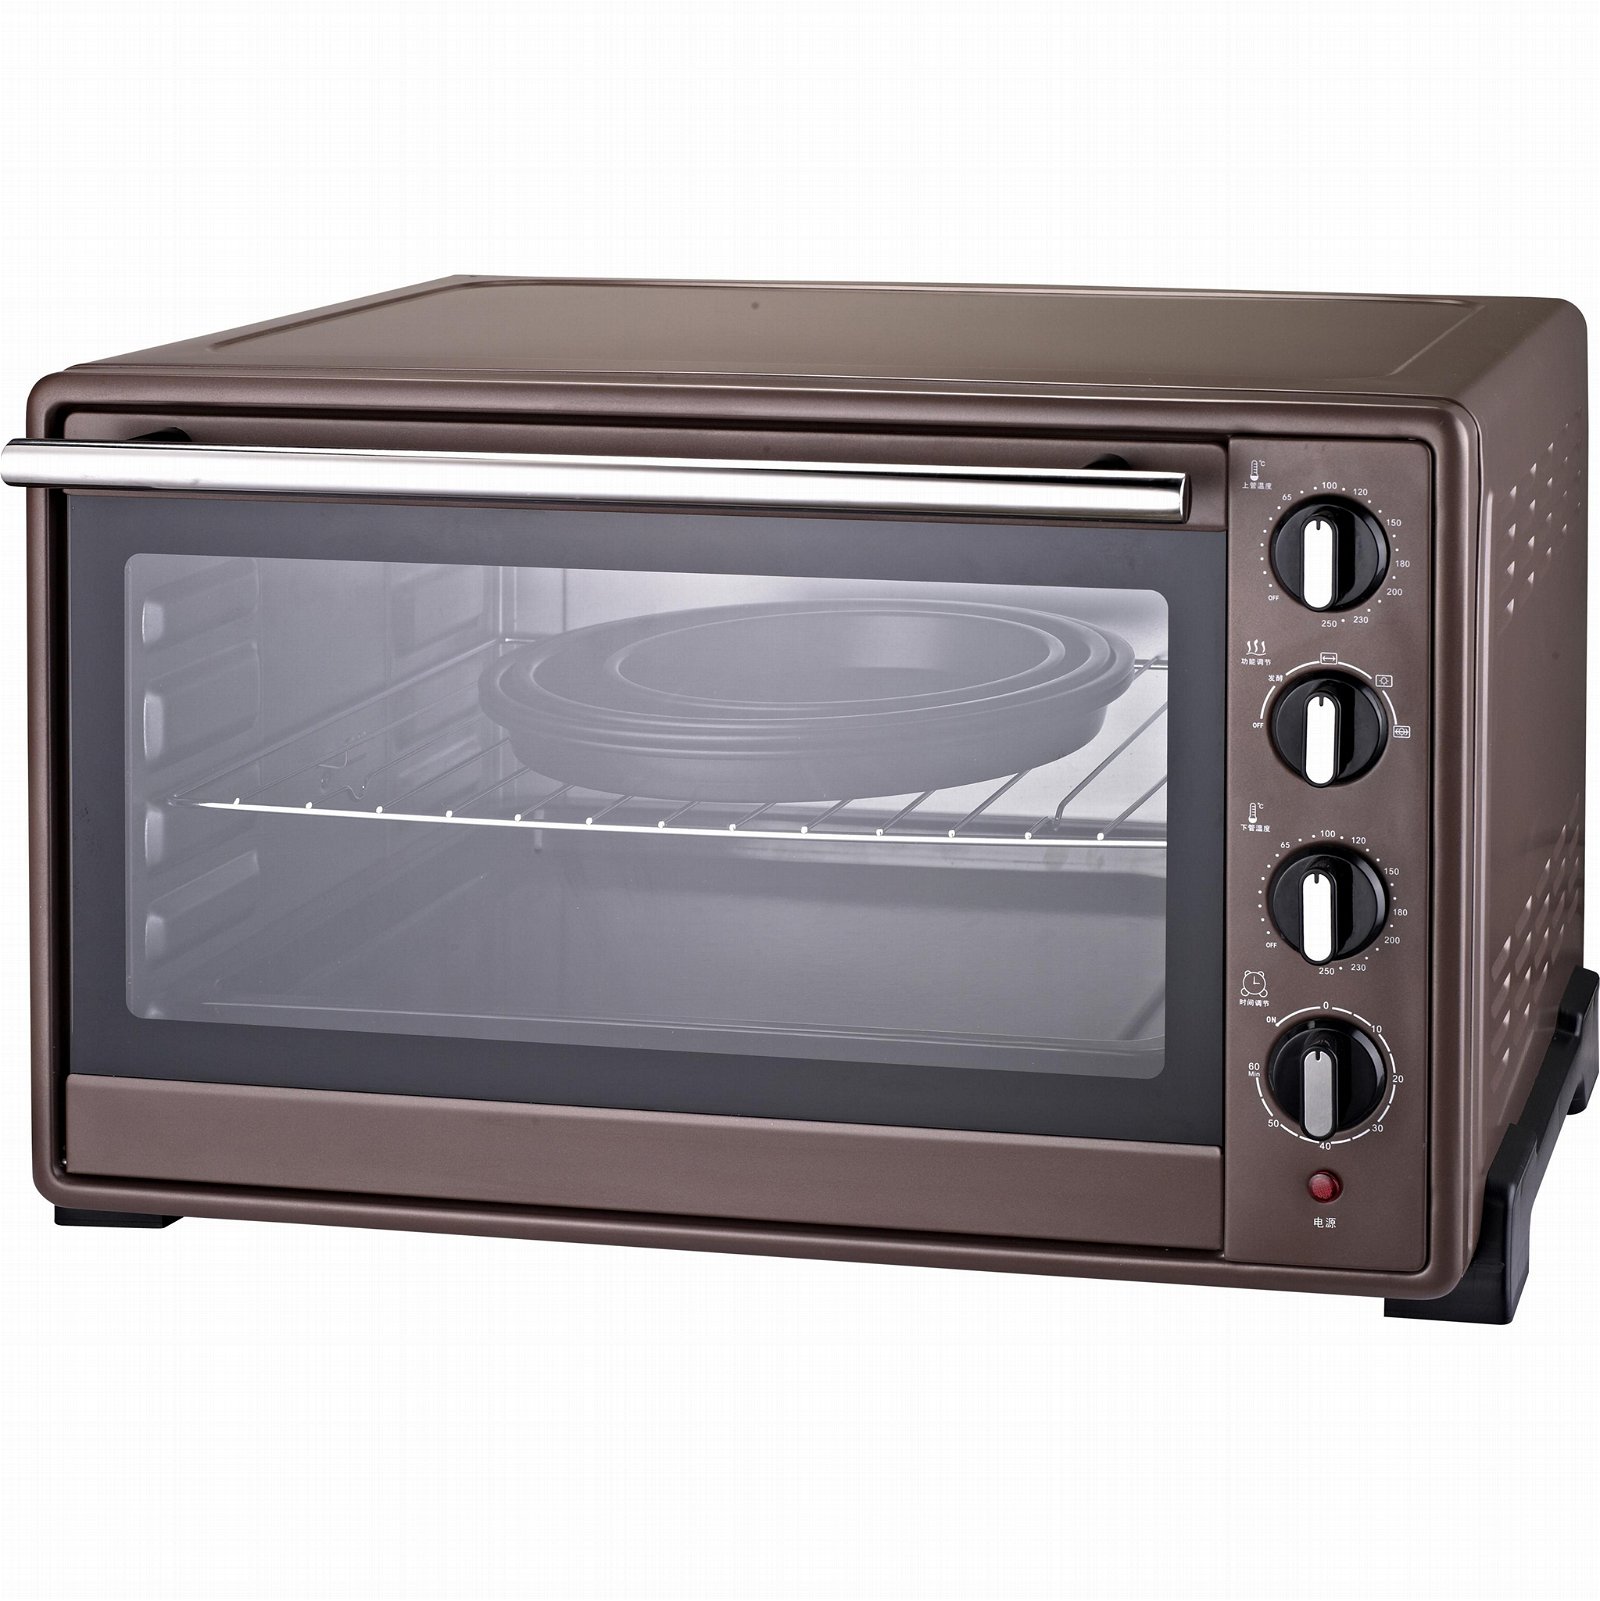 HOPEZ 46L double glass toaster oven electric glass oven